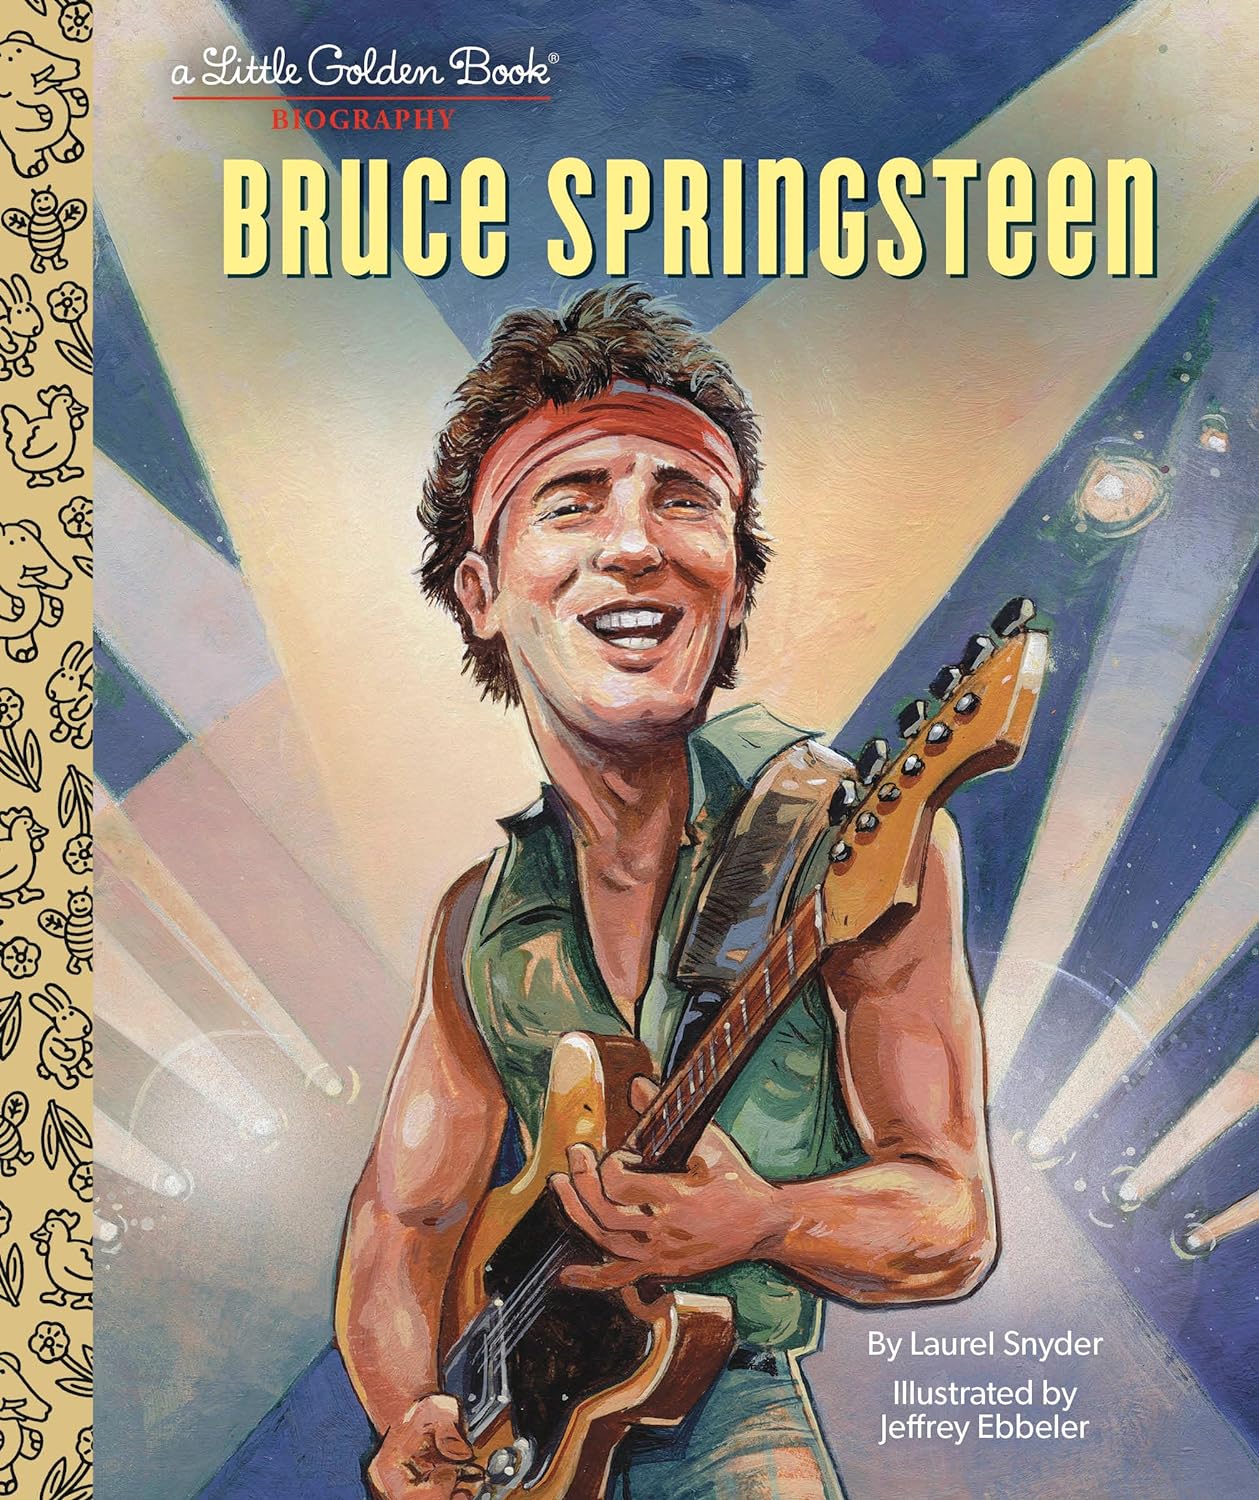 cover of bruce springteen book with illistration of bruce palying guitar.